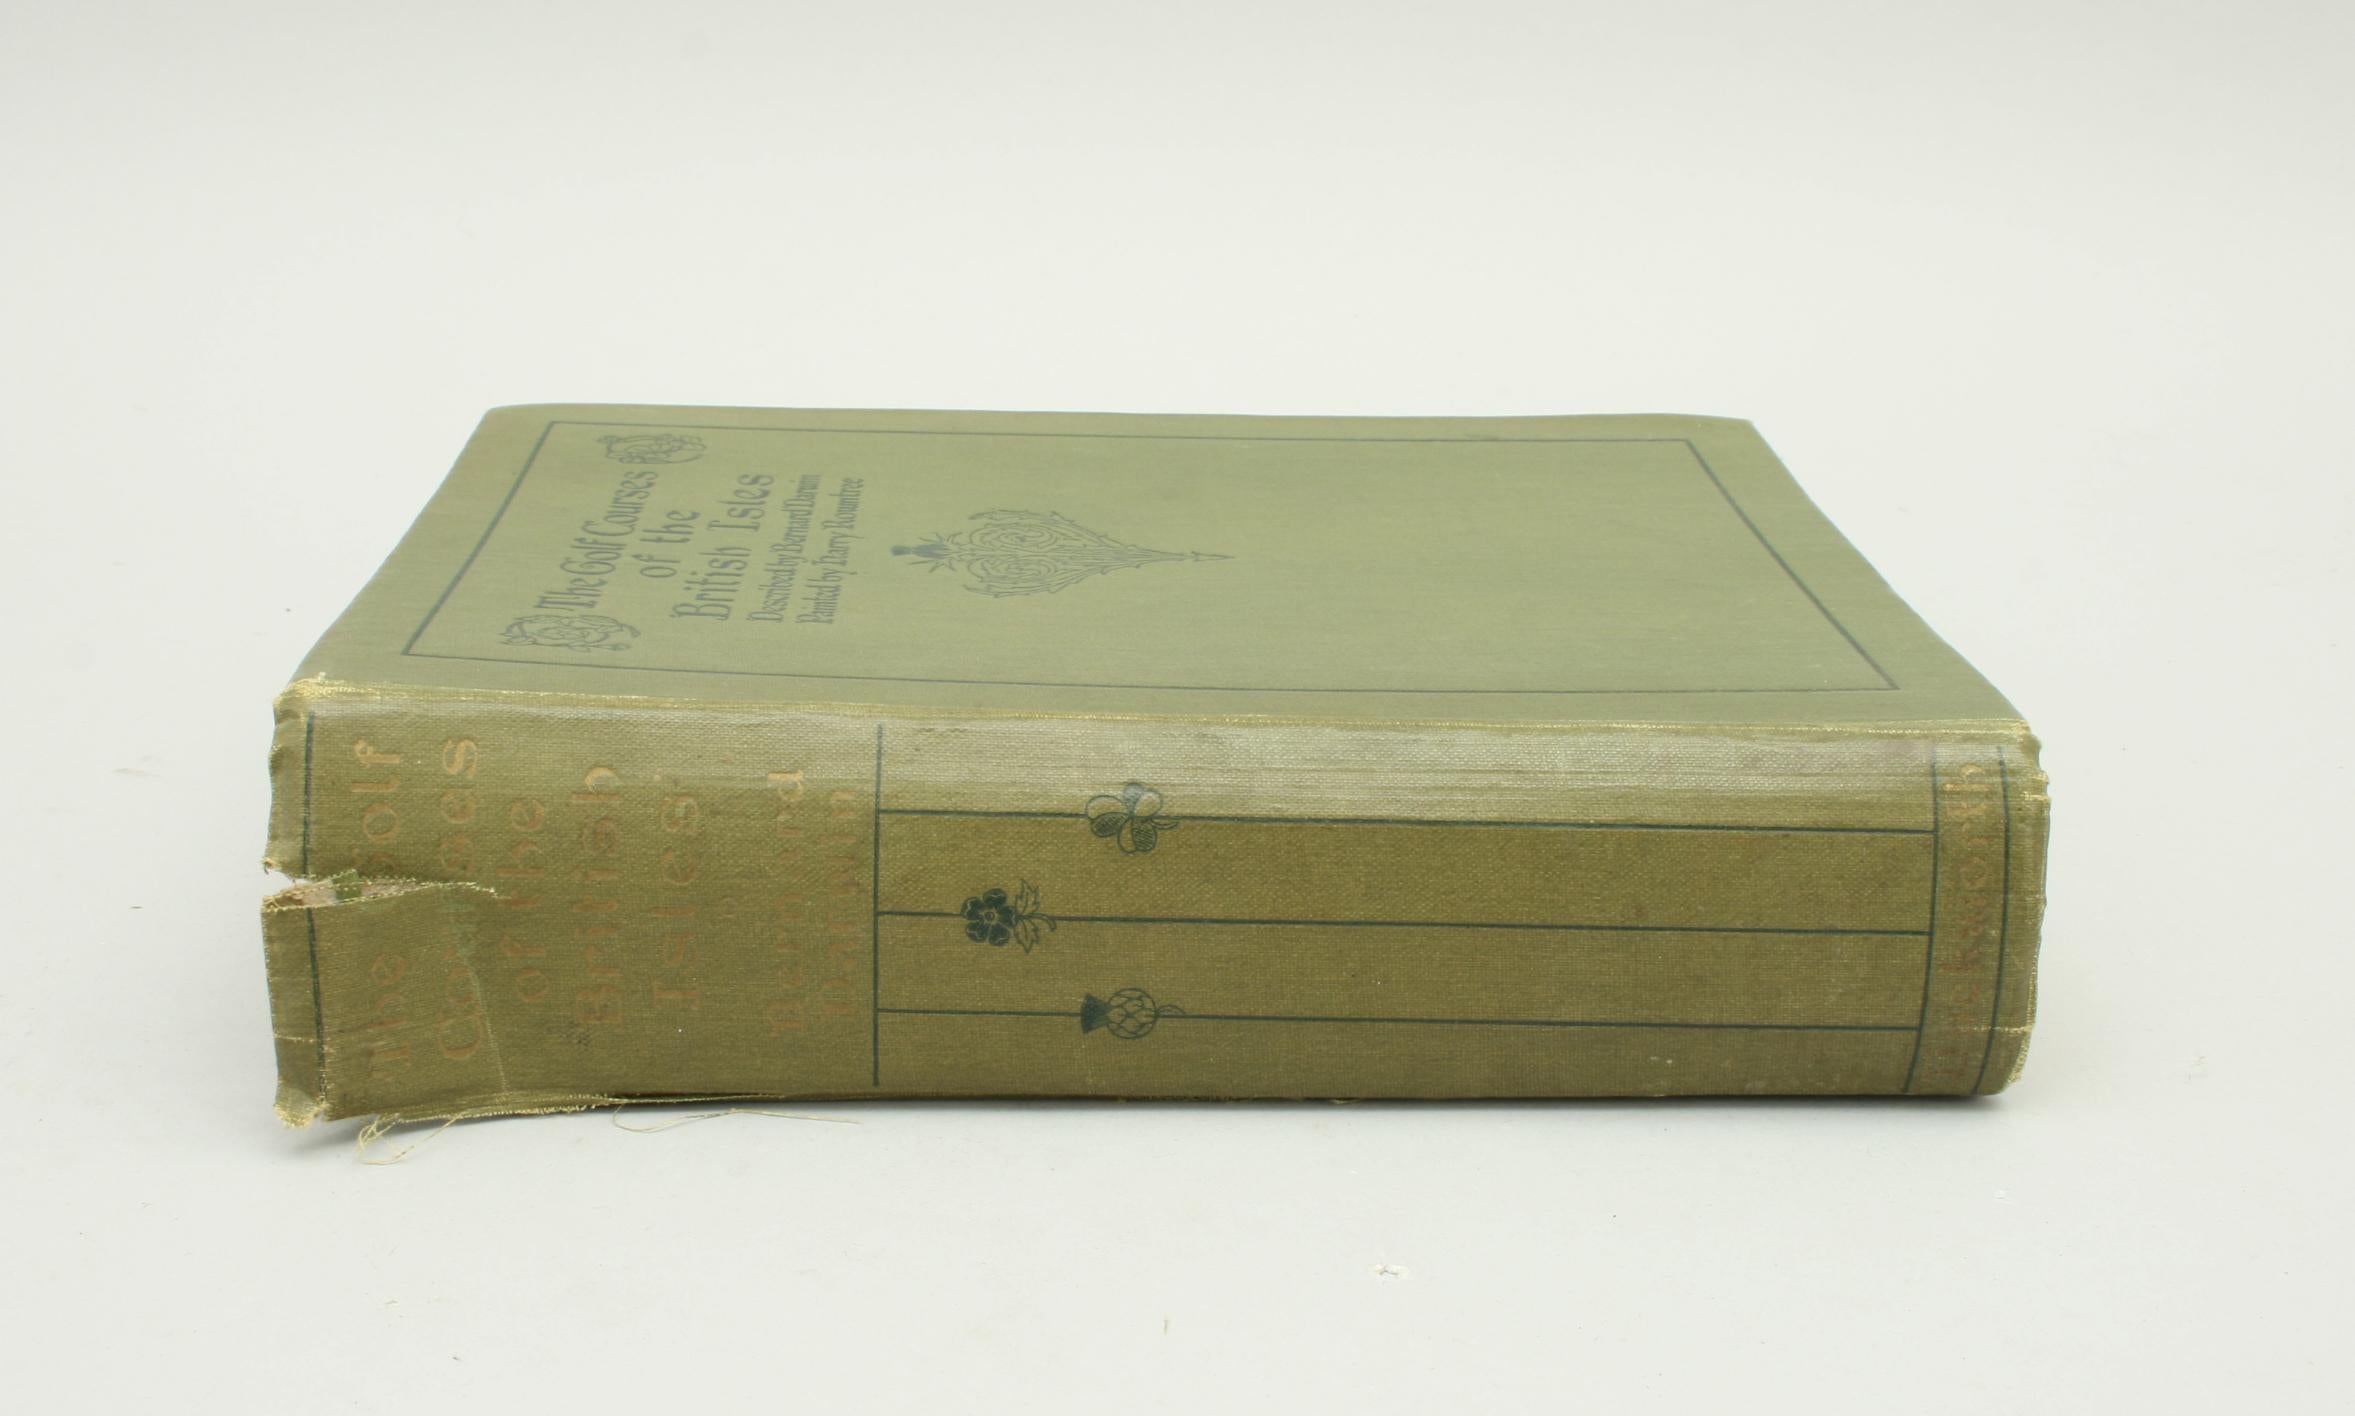 Sporting Art Antique Golf Book, The Golf Courses of the British Isles, by Bernard Darwin